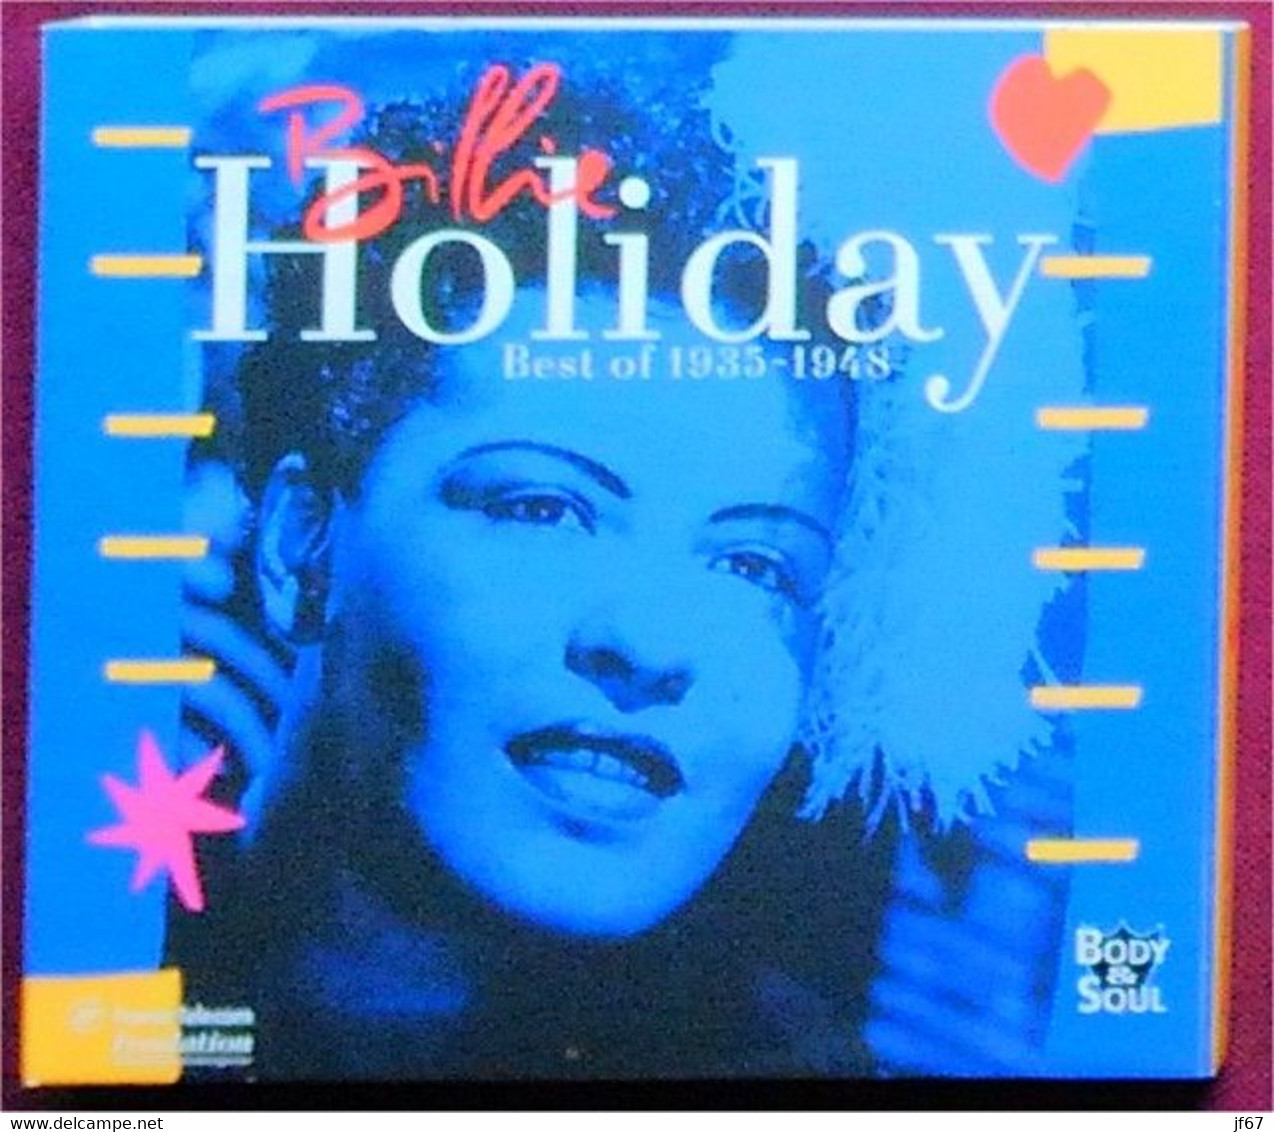 Billie Holiday – Best Of 1935 - 1948 - Blues